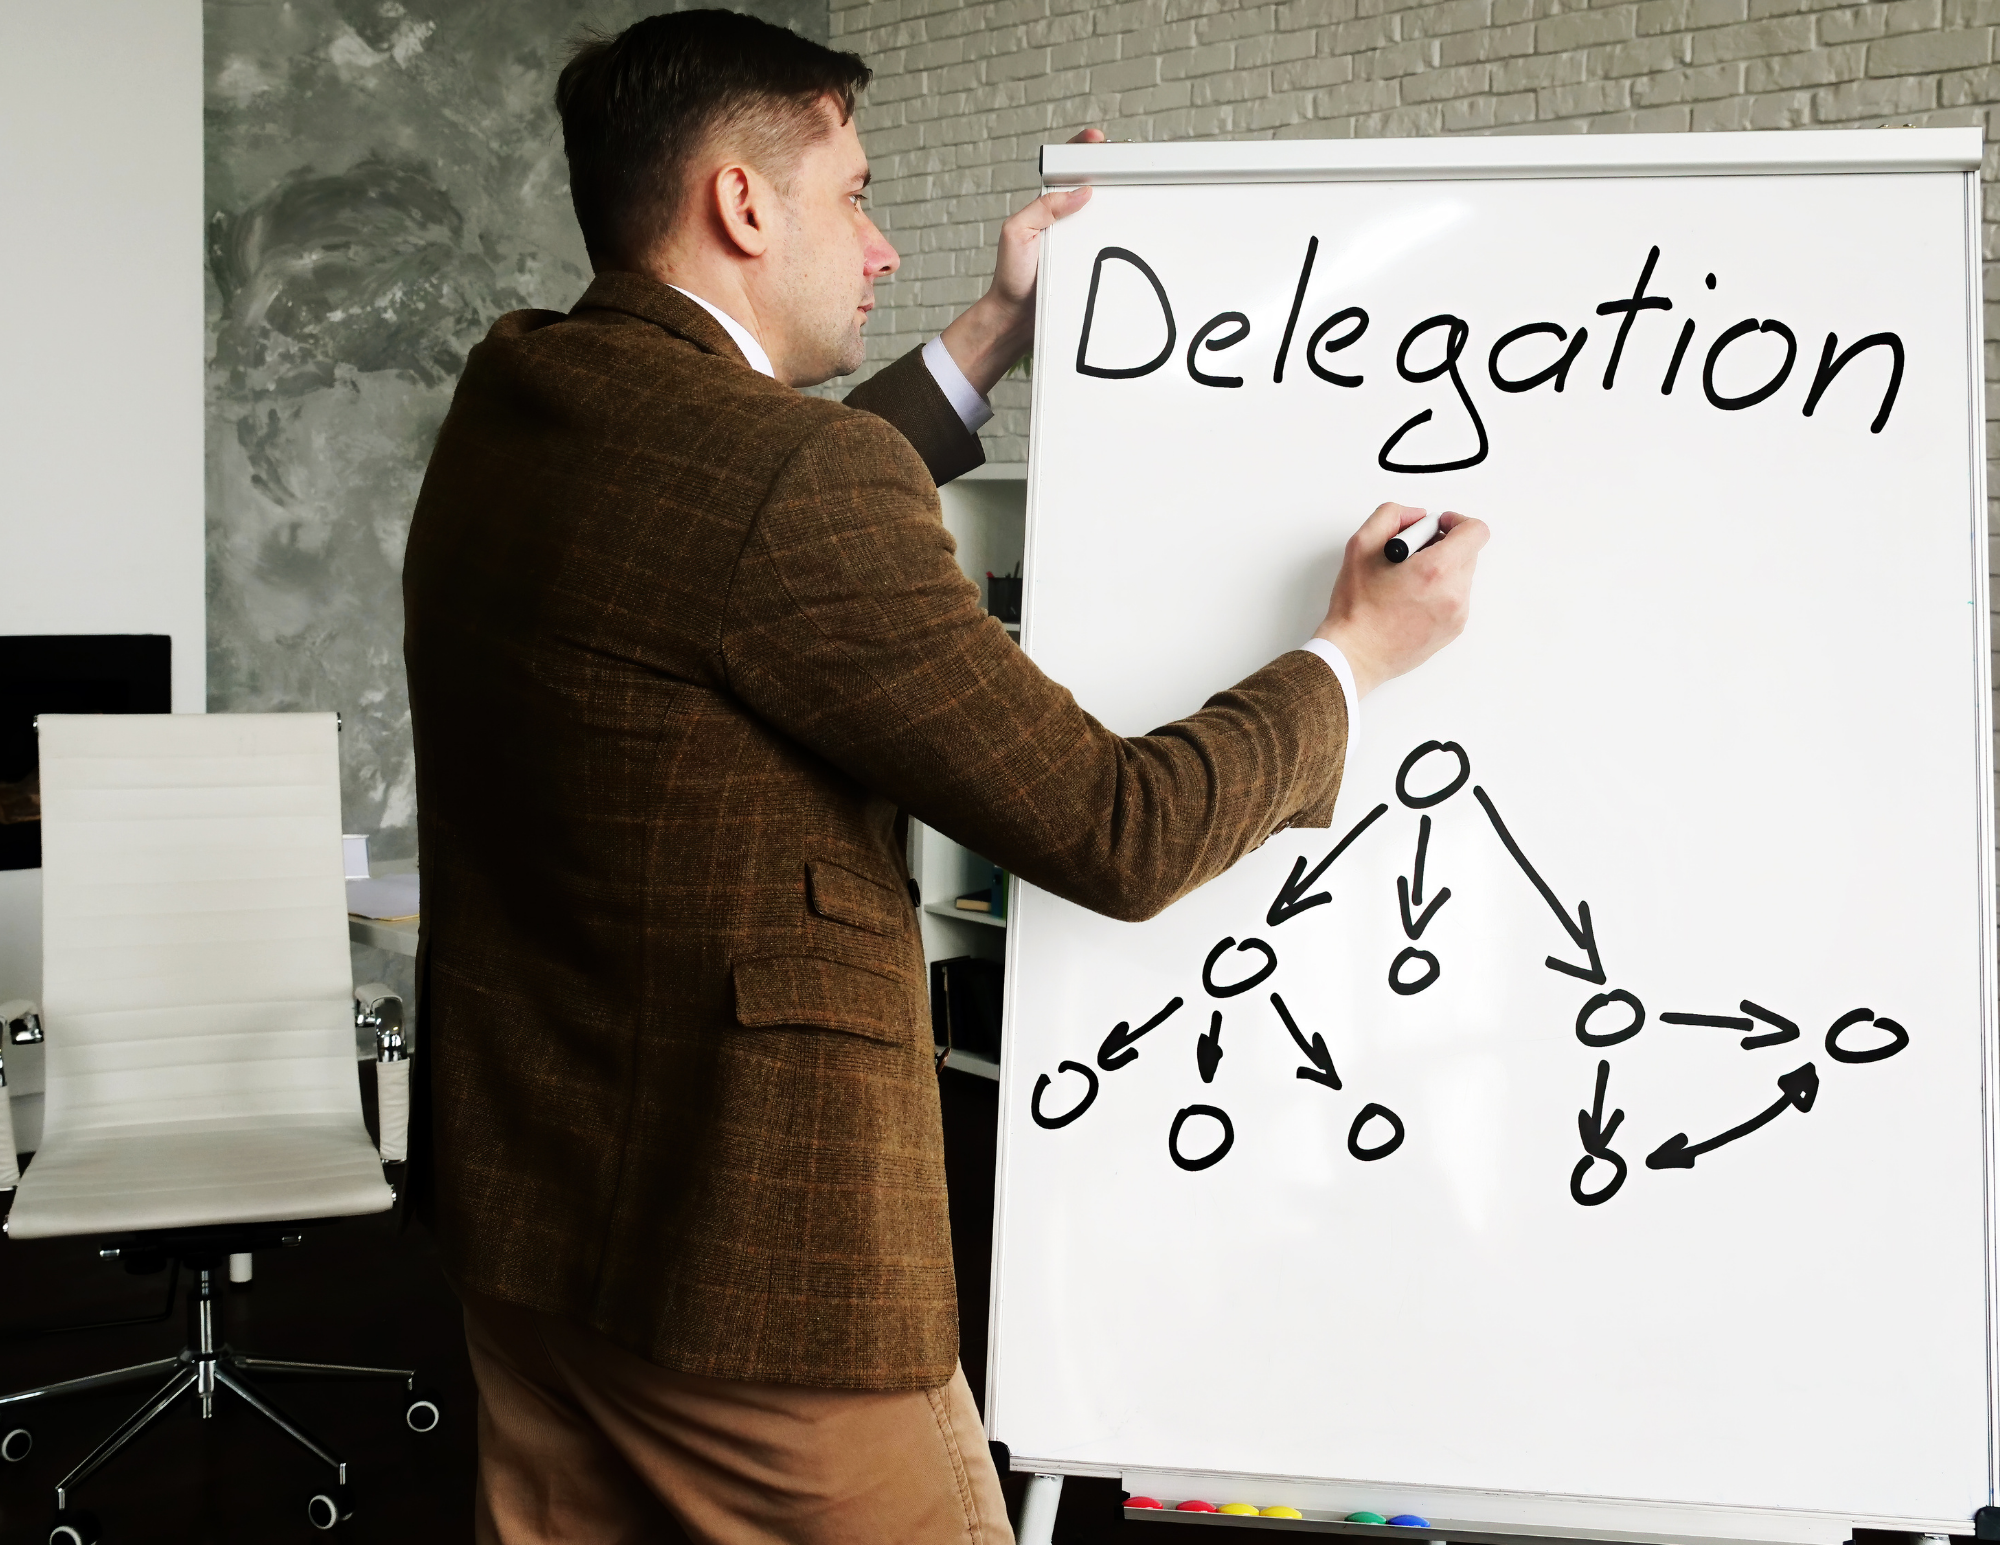 How to Delegate Better?